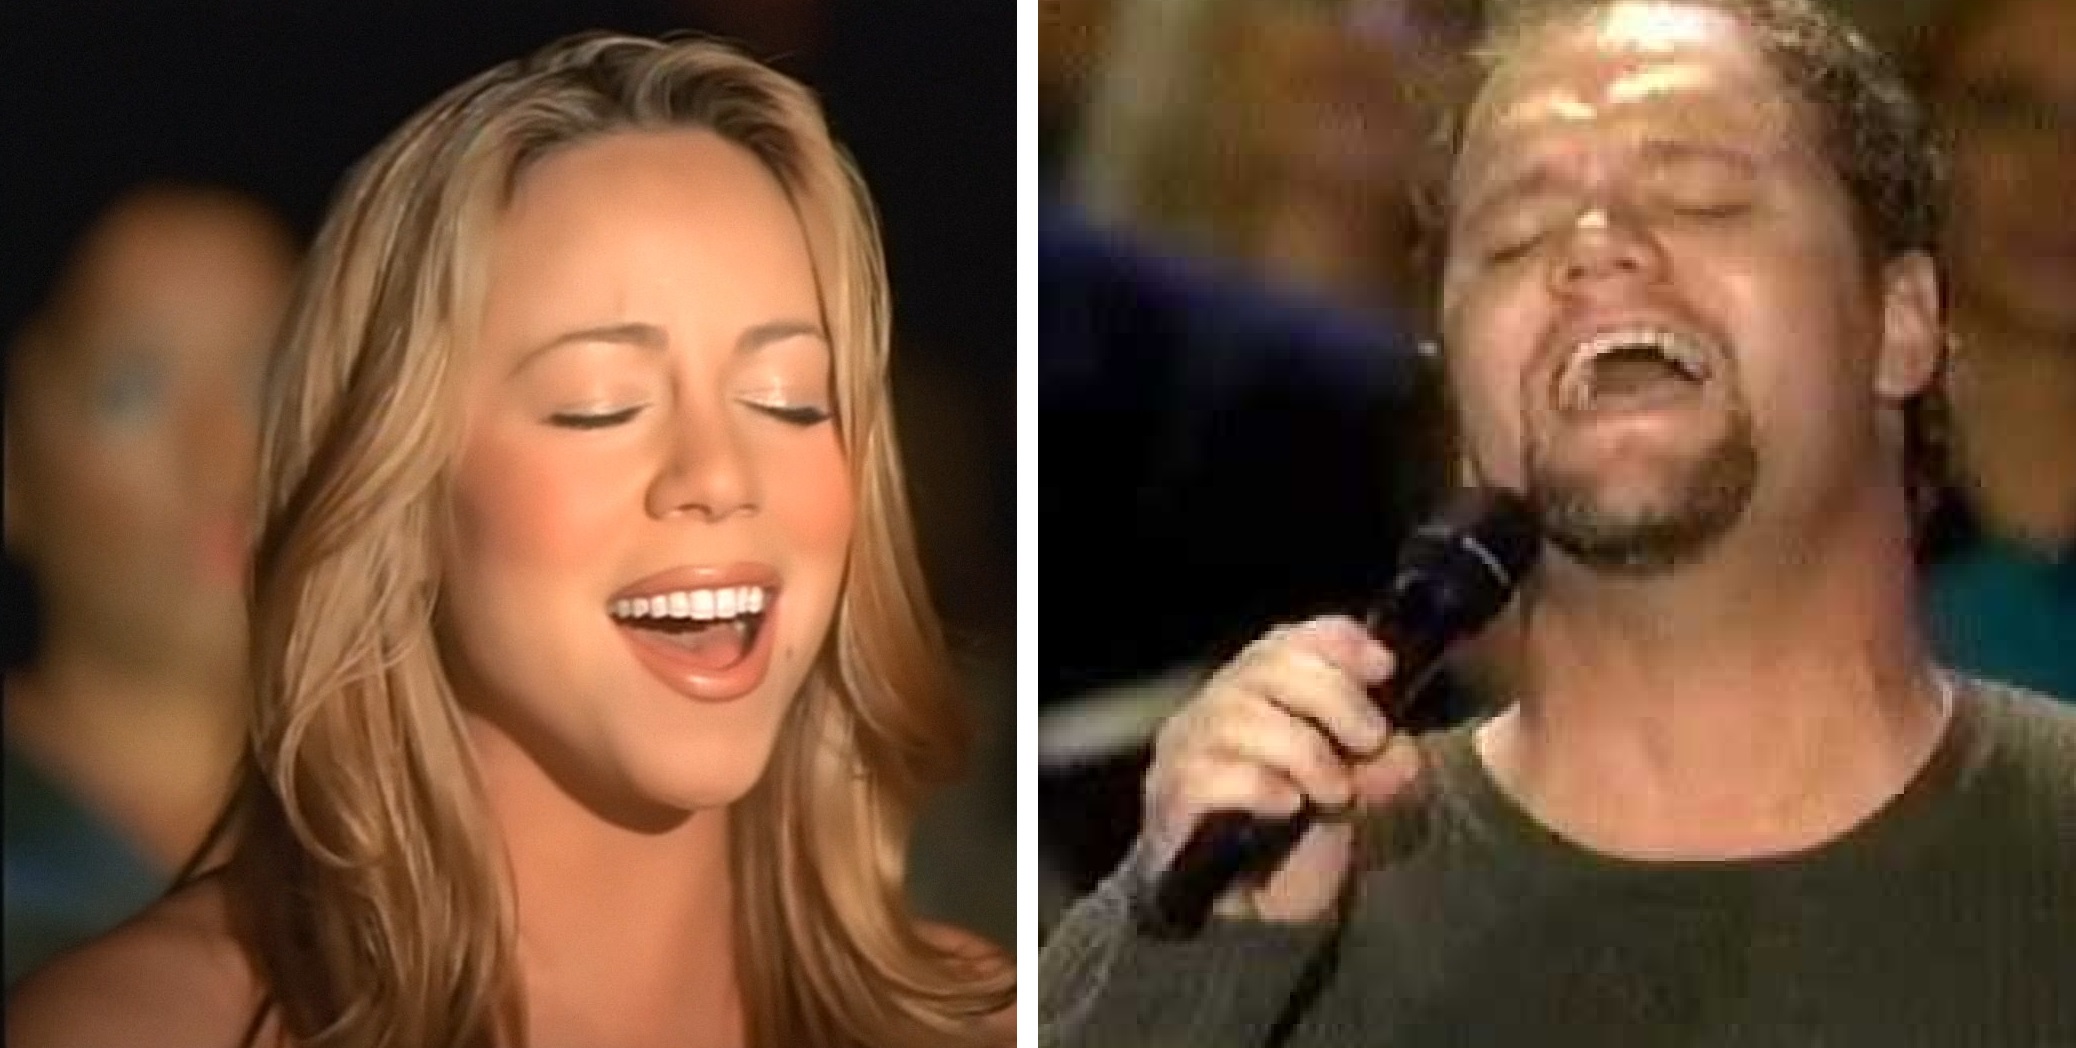 Ranking The Top 10 Best Renditions Of – ‘O Holy Night’